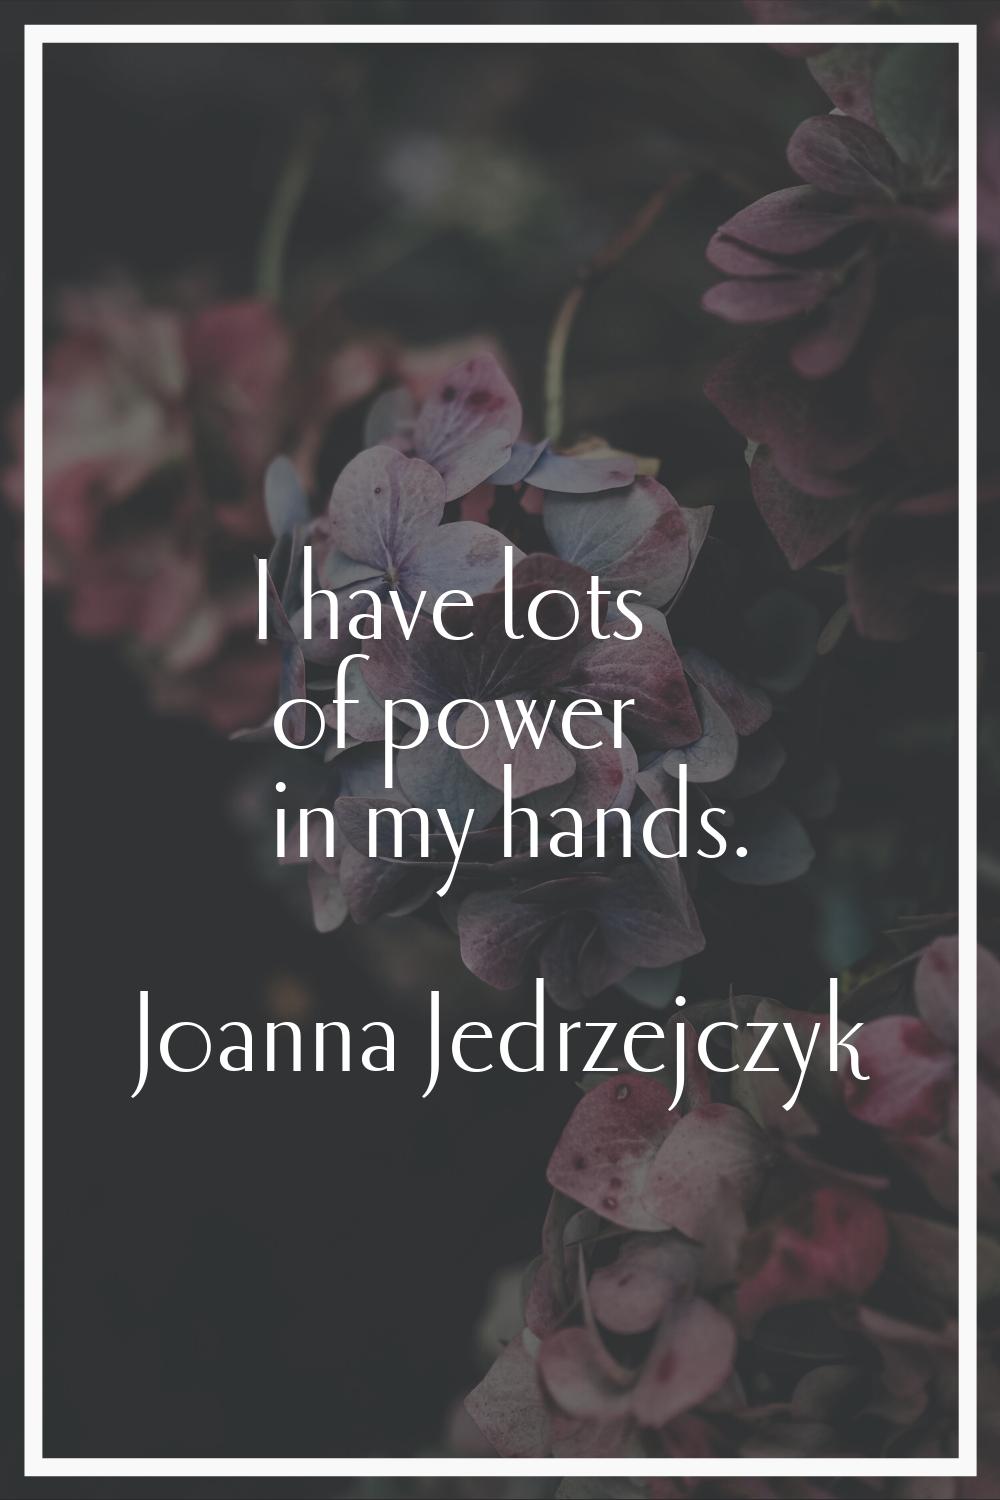 I have lots of power in my hands.